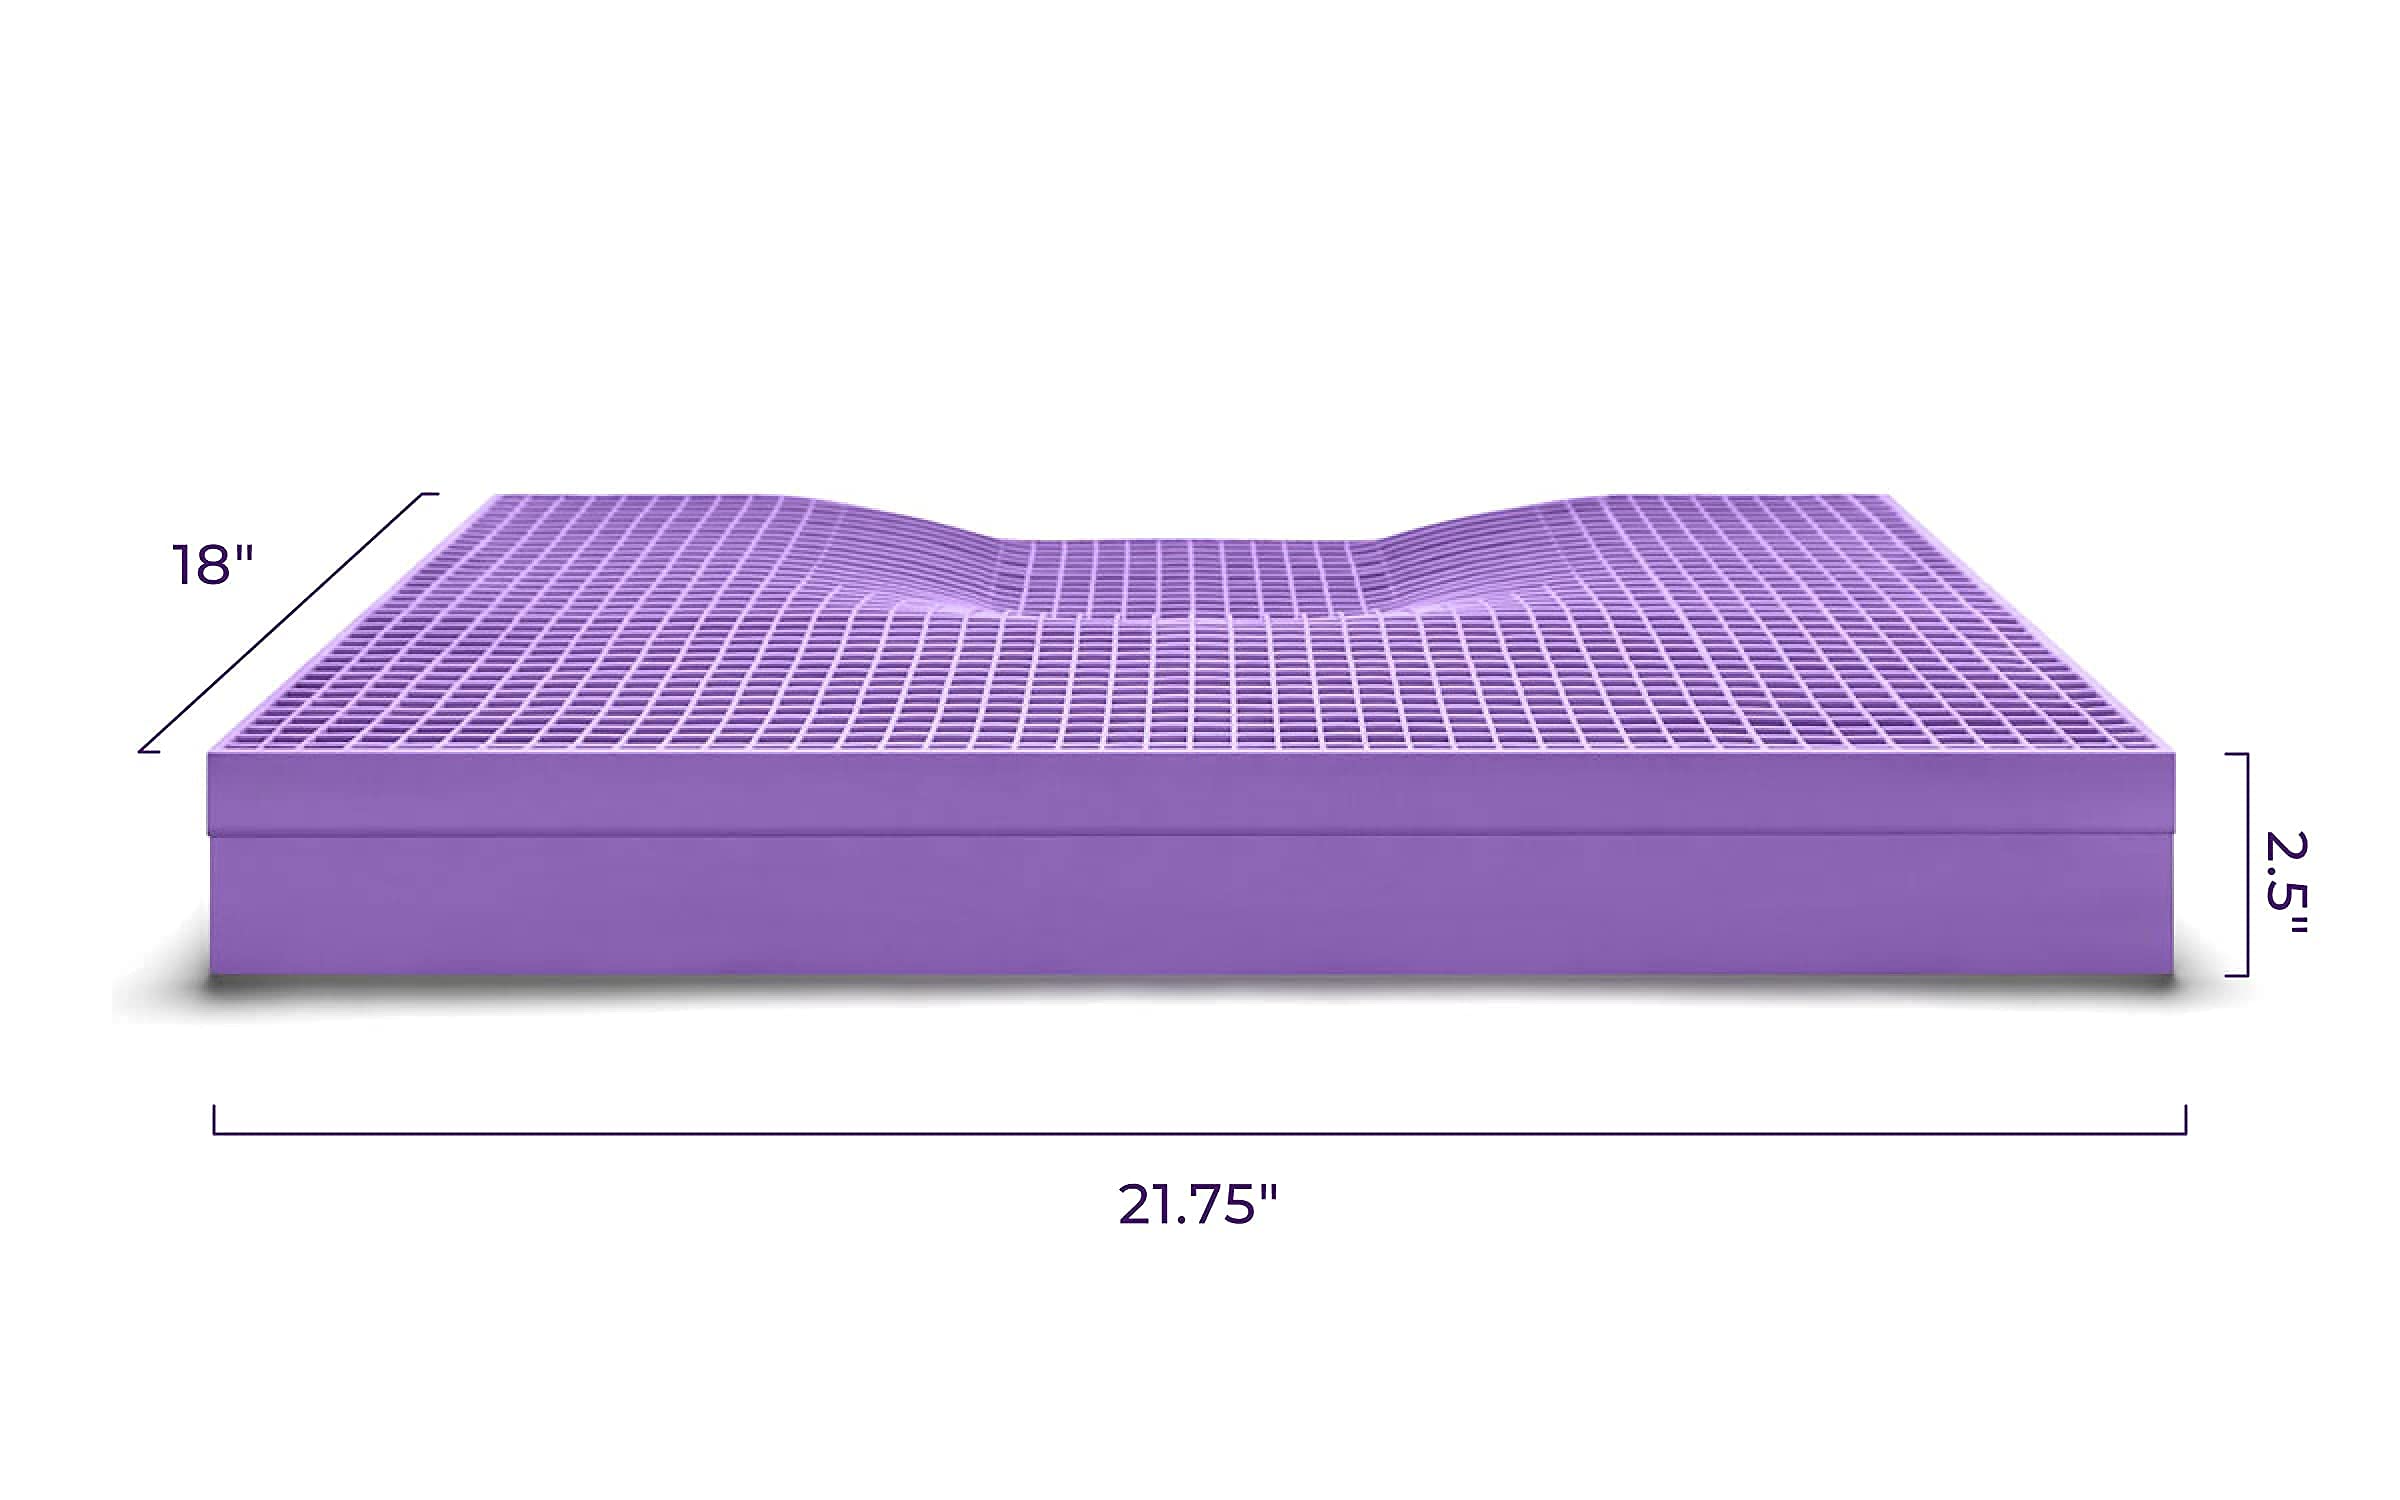 Purple Ultimate Seat Cushion | Pressure Reducing Grid Designed for Ultimate Comfort | Designed for Gaming | Made in The USA